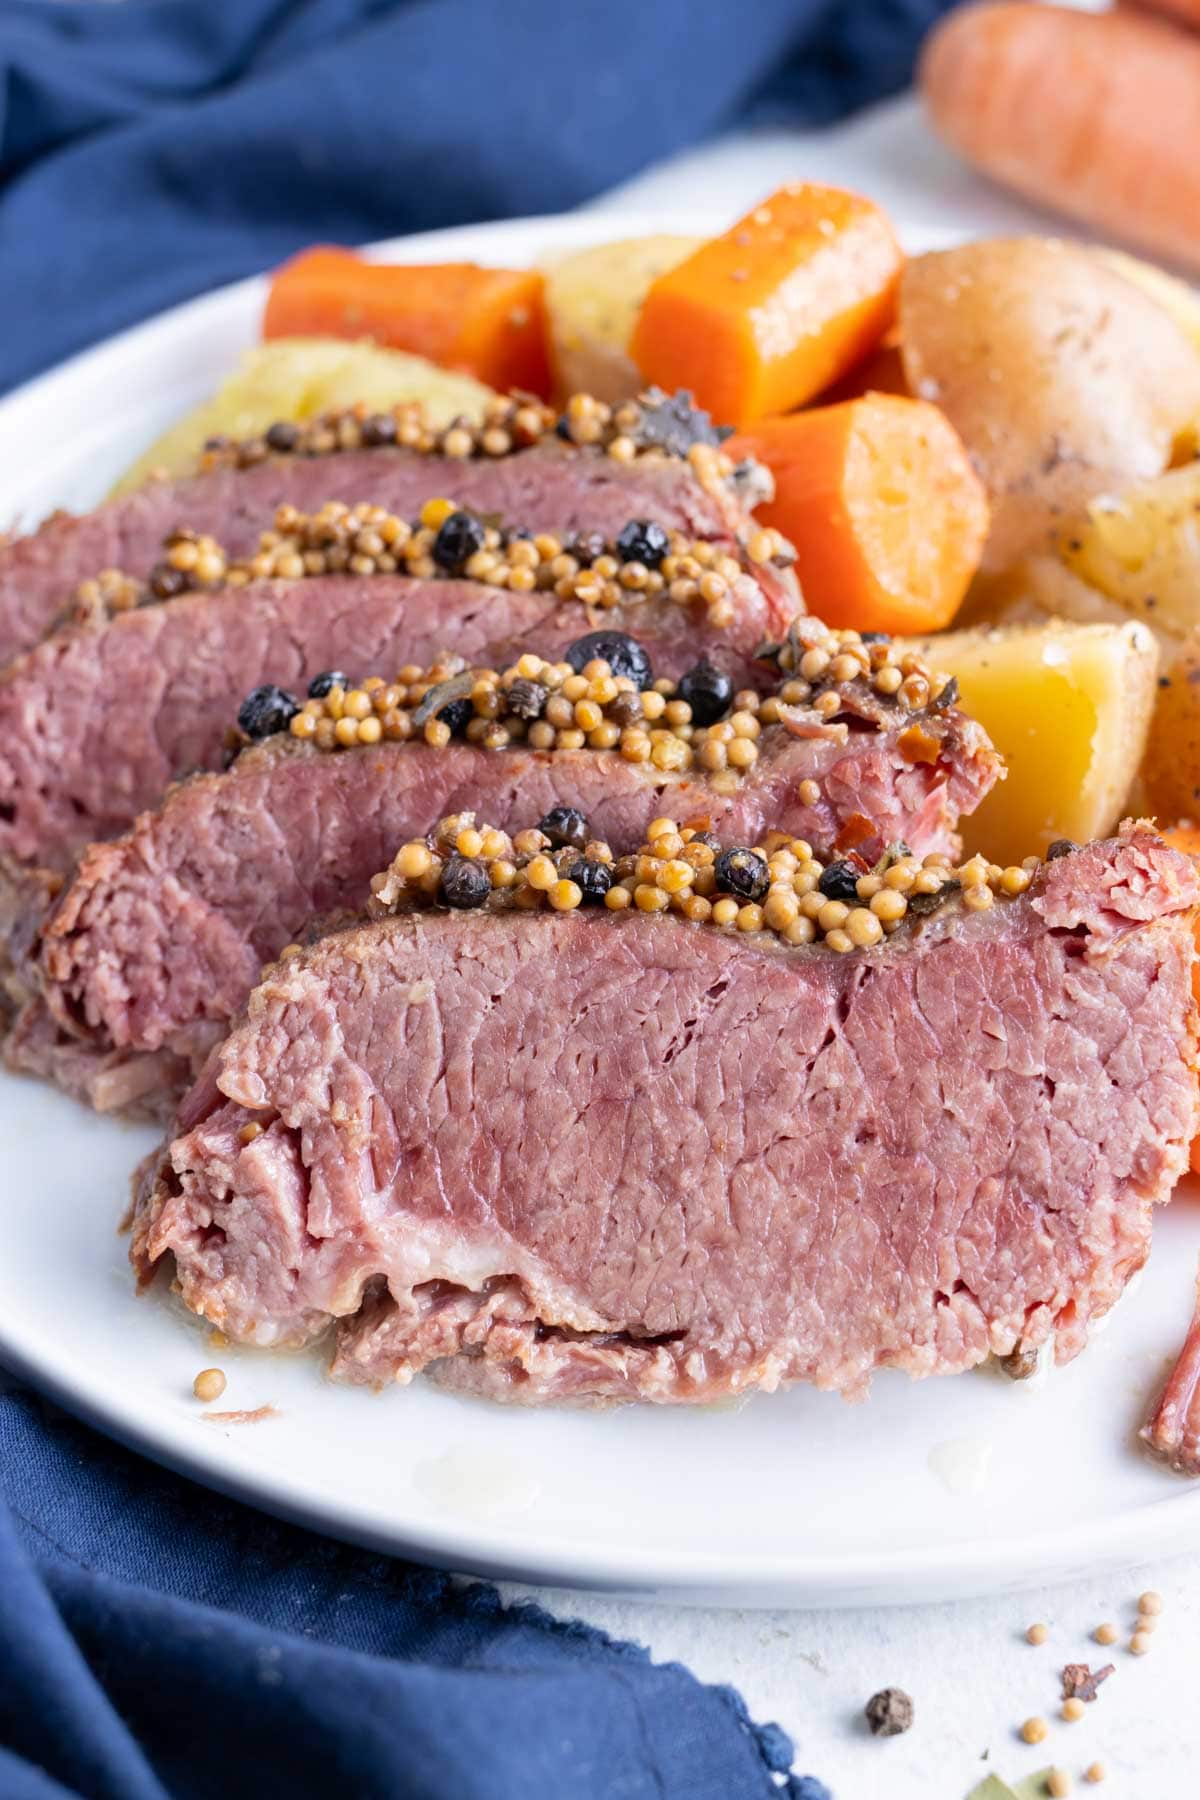 Irish corned beef and cabbage is served on a plate for dinner. 